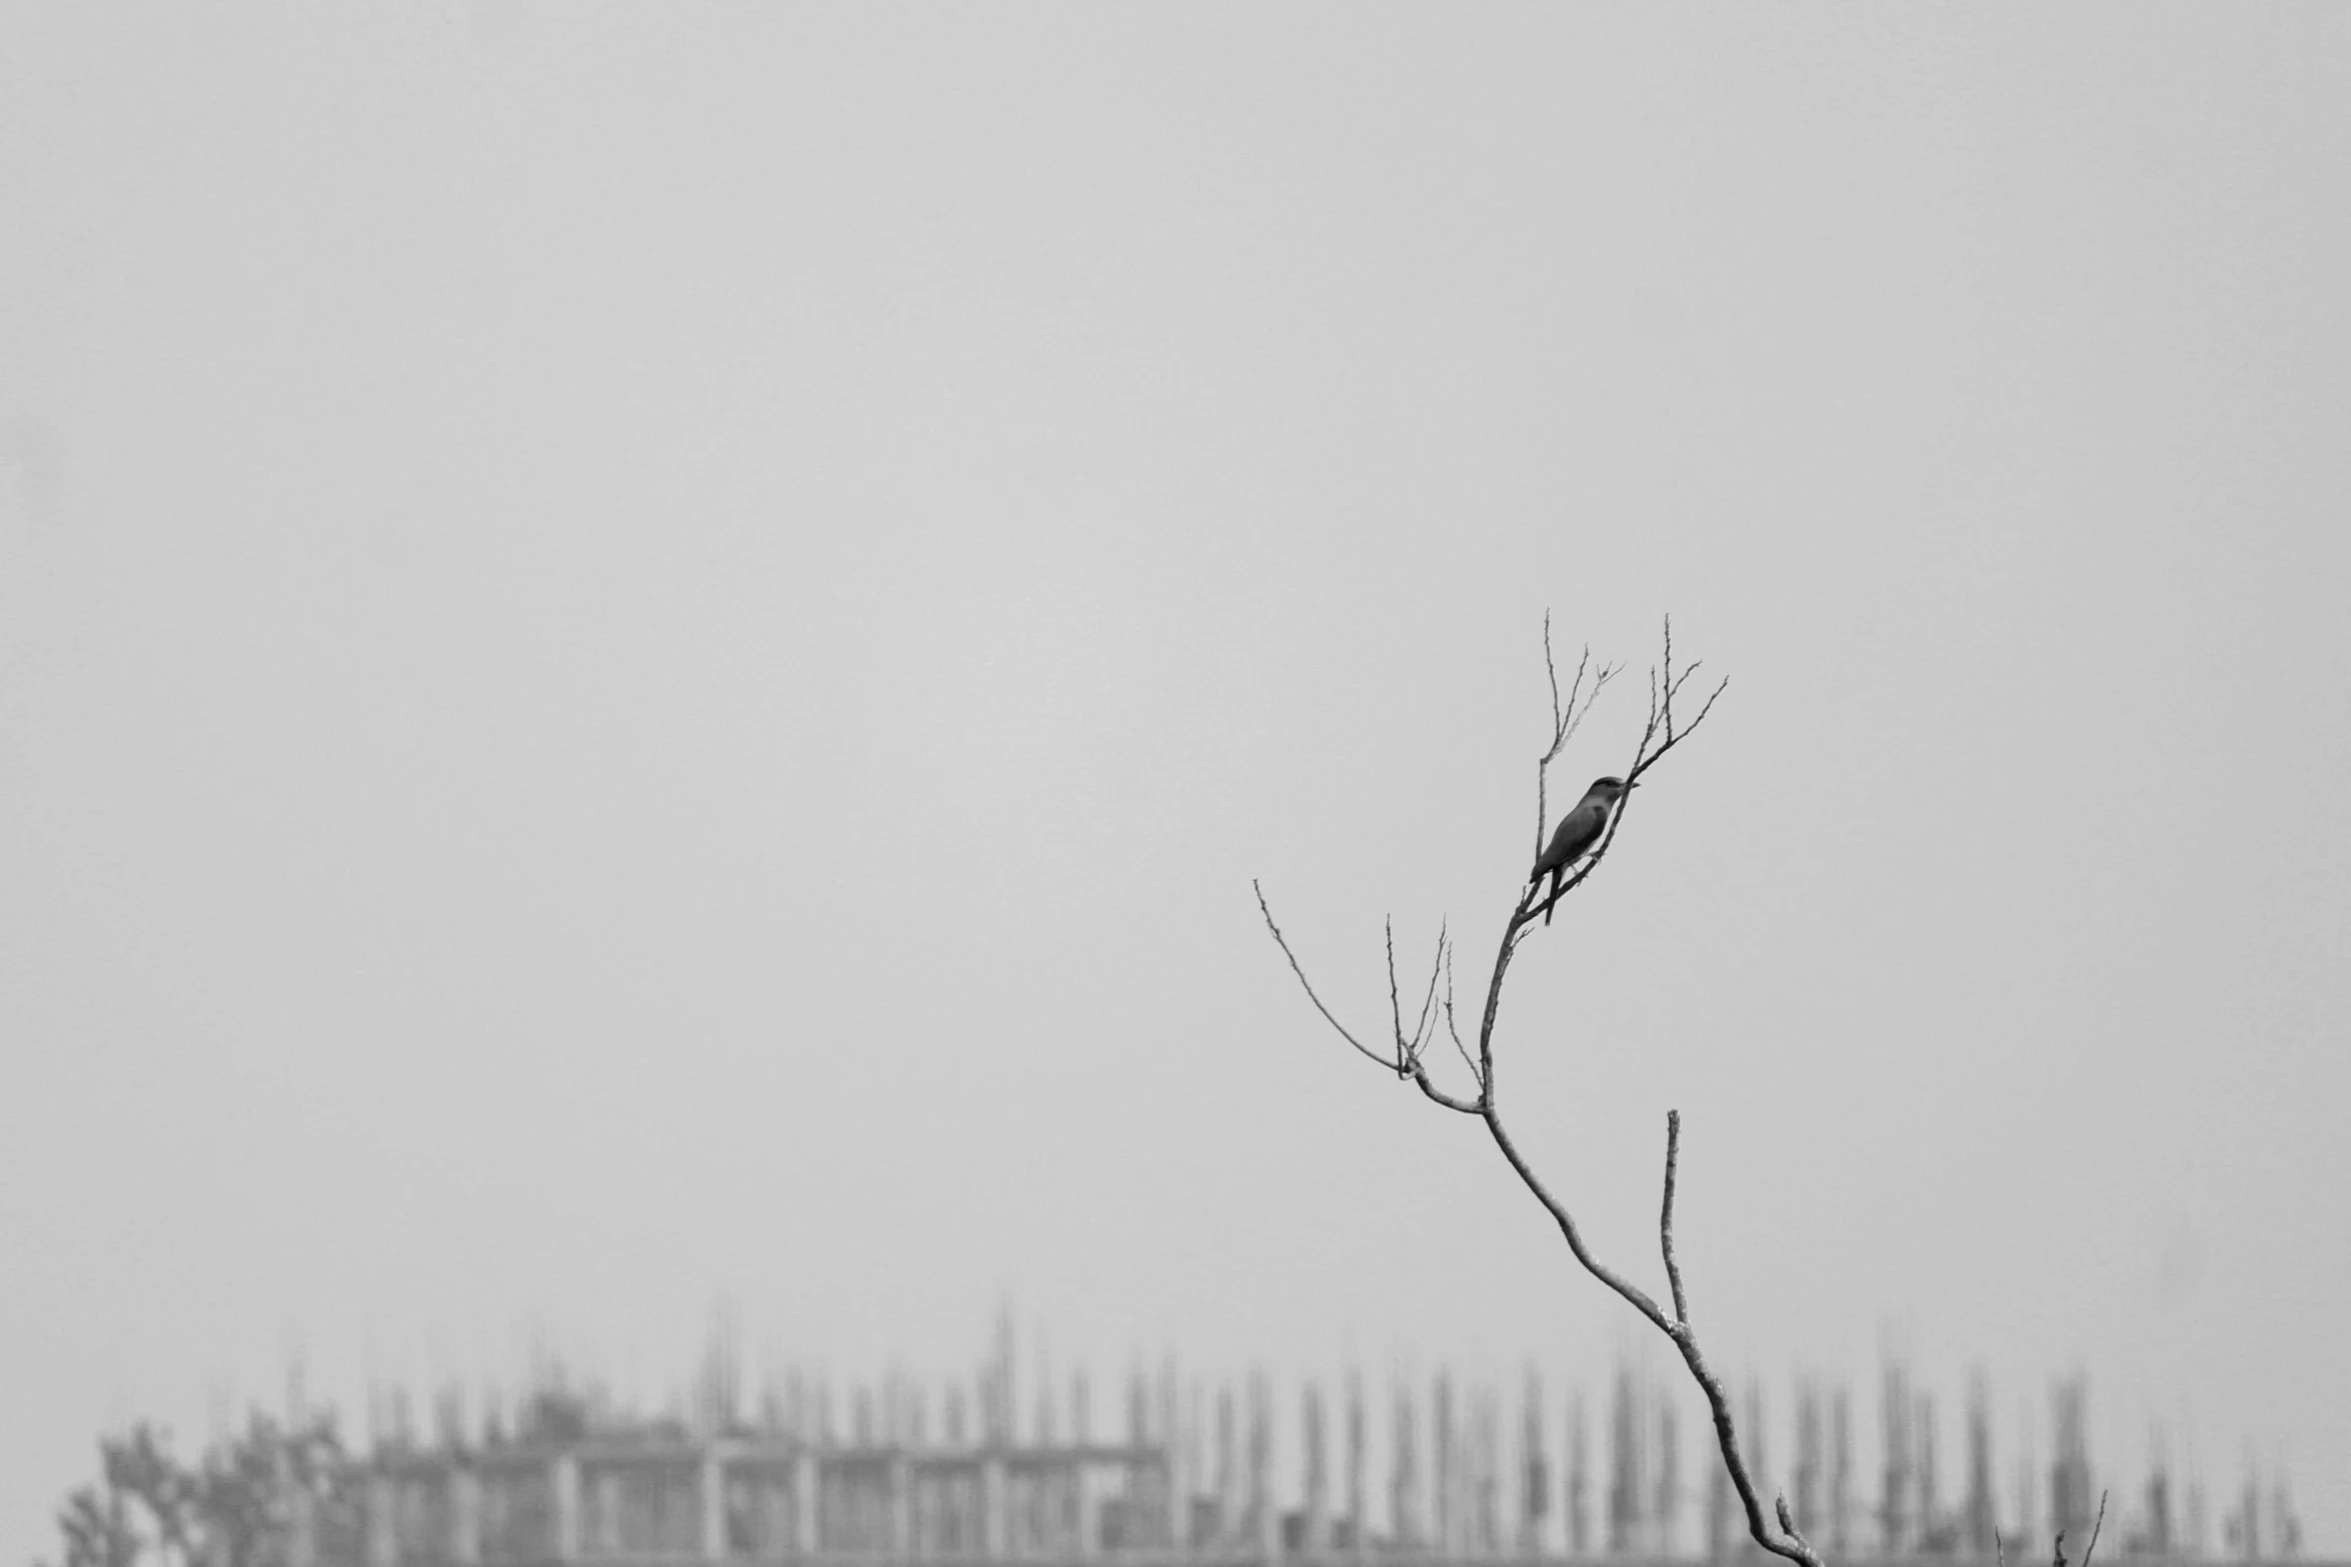 a black and white photo of a bird perched on a tree, by Cheng Jiasui, pexels contest winner, postminimalism, desolate :: long shot, distant city, gray wasteland, an abstract